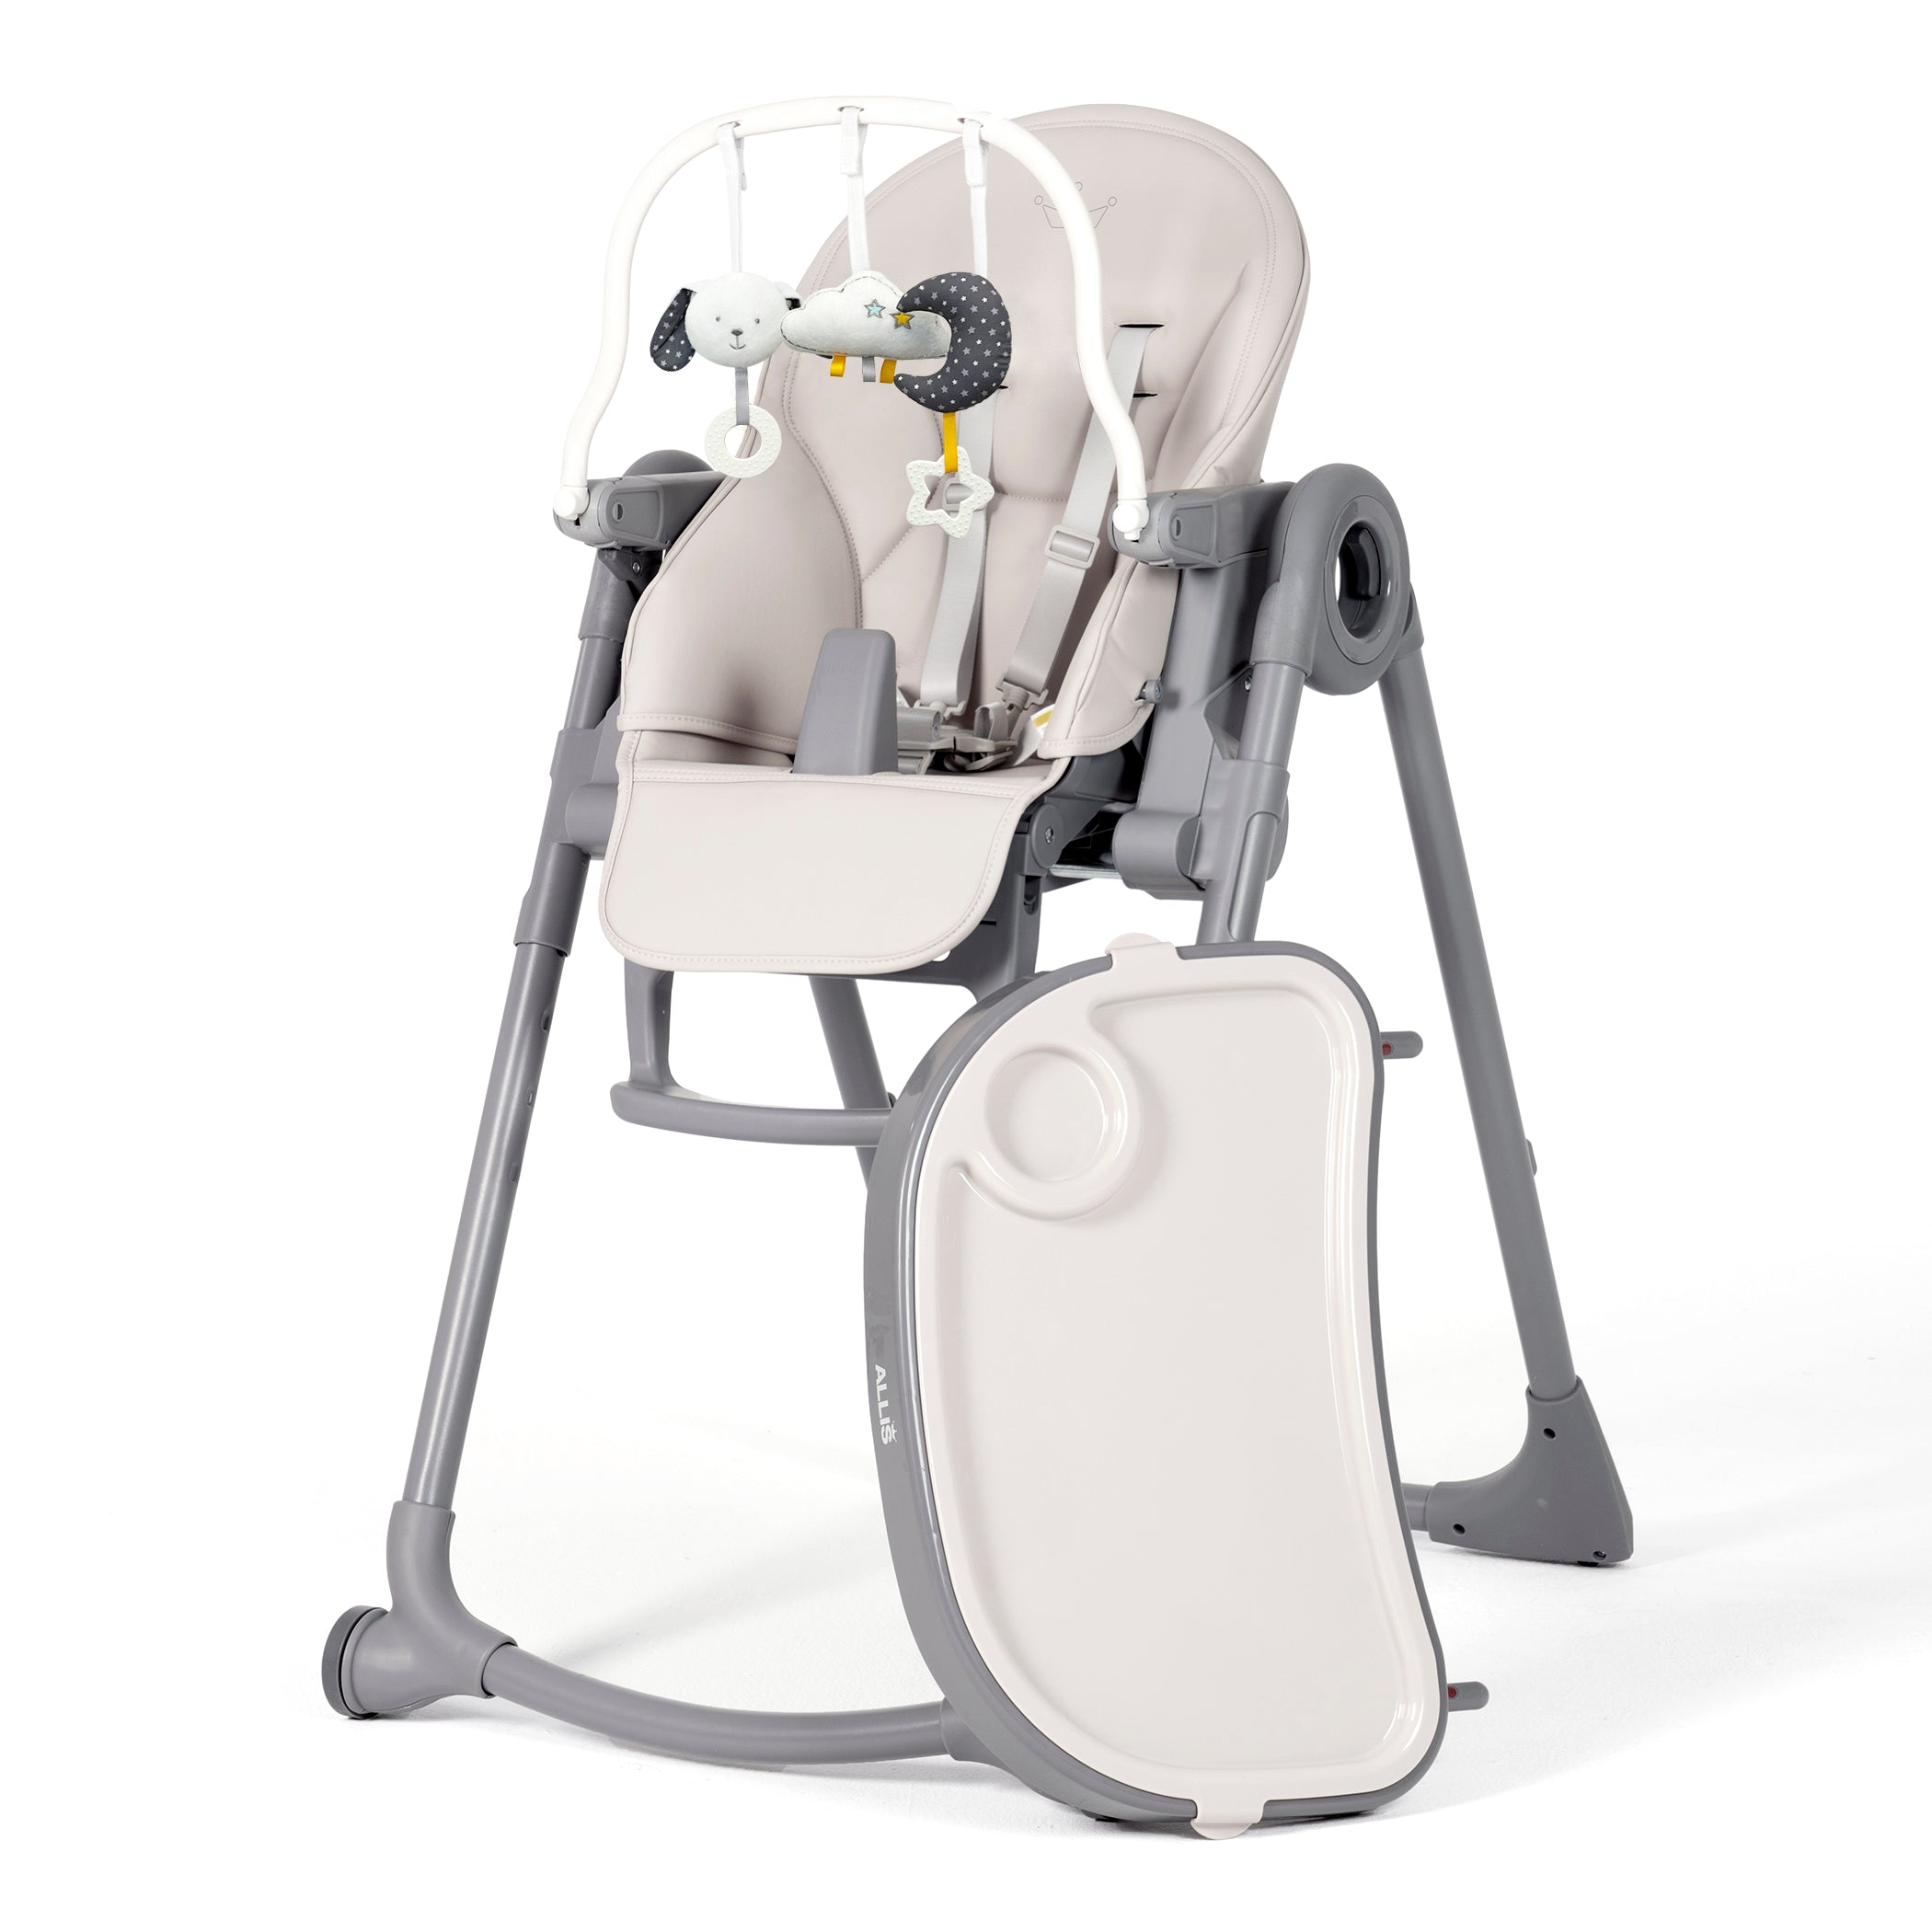 Lola Baby High Chair in light grey, multiple positions shown